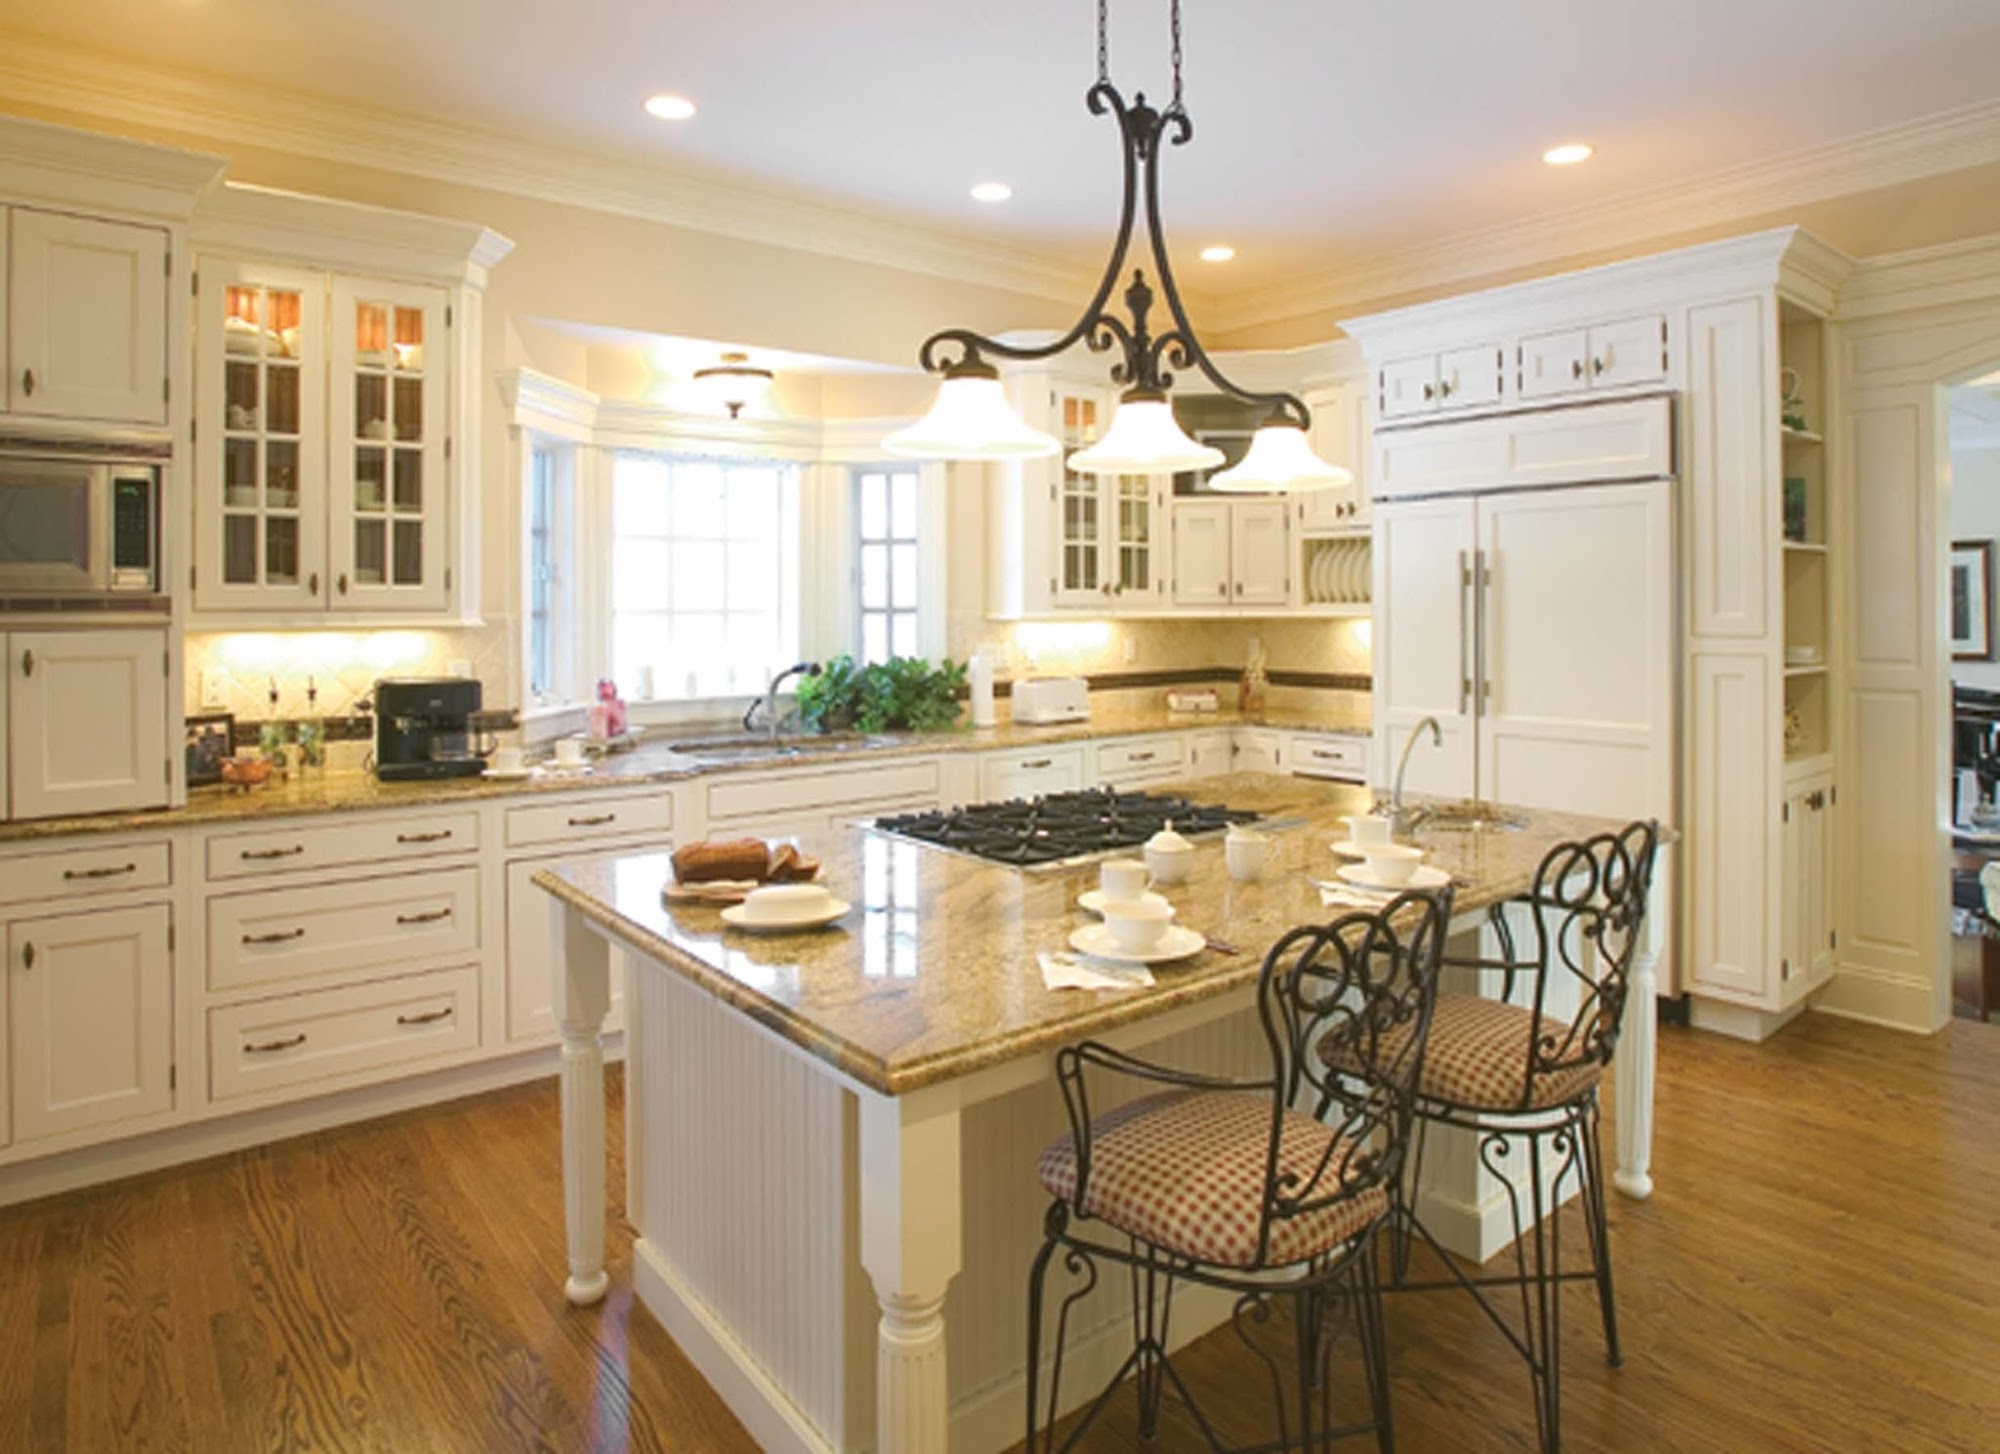 Boone Creek Cabinetry & Design